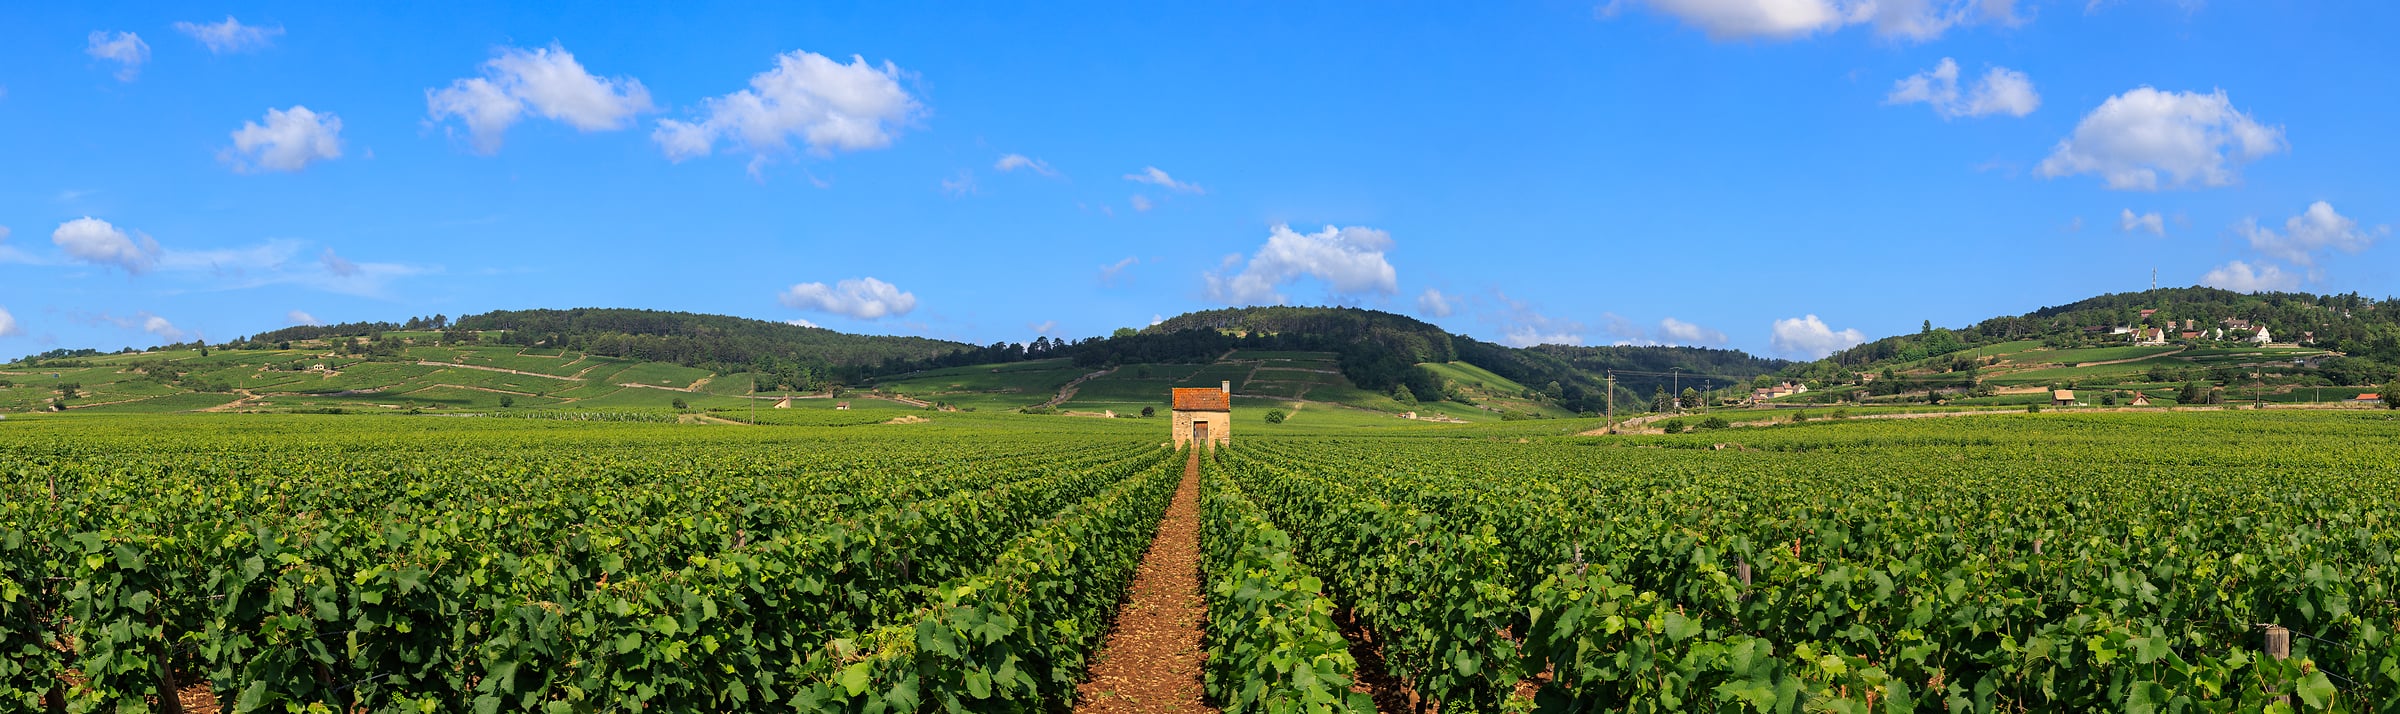 1,081 megapixels! A very high resolution, large-format landscape photo of a beautiful French vineyard; photograph created by Scott Dimond in Belissand Beaune Premier Cru, Beaune, Côte-d'Or, France.